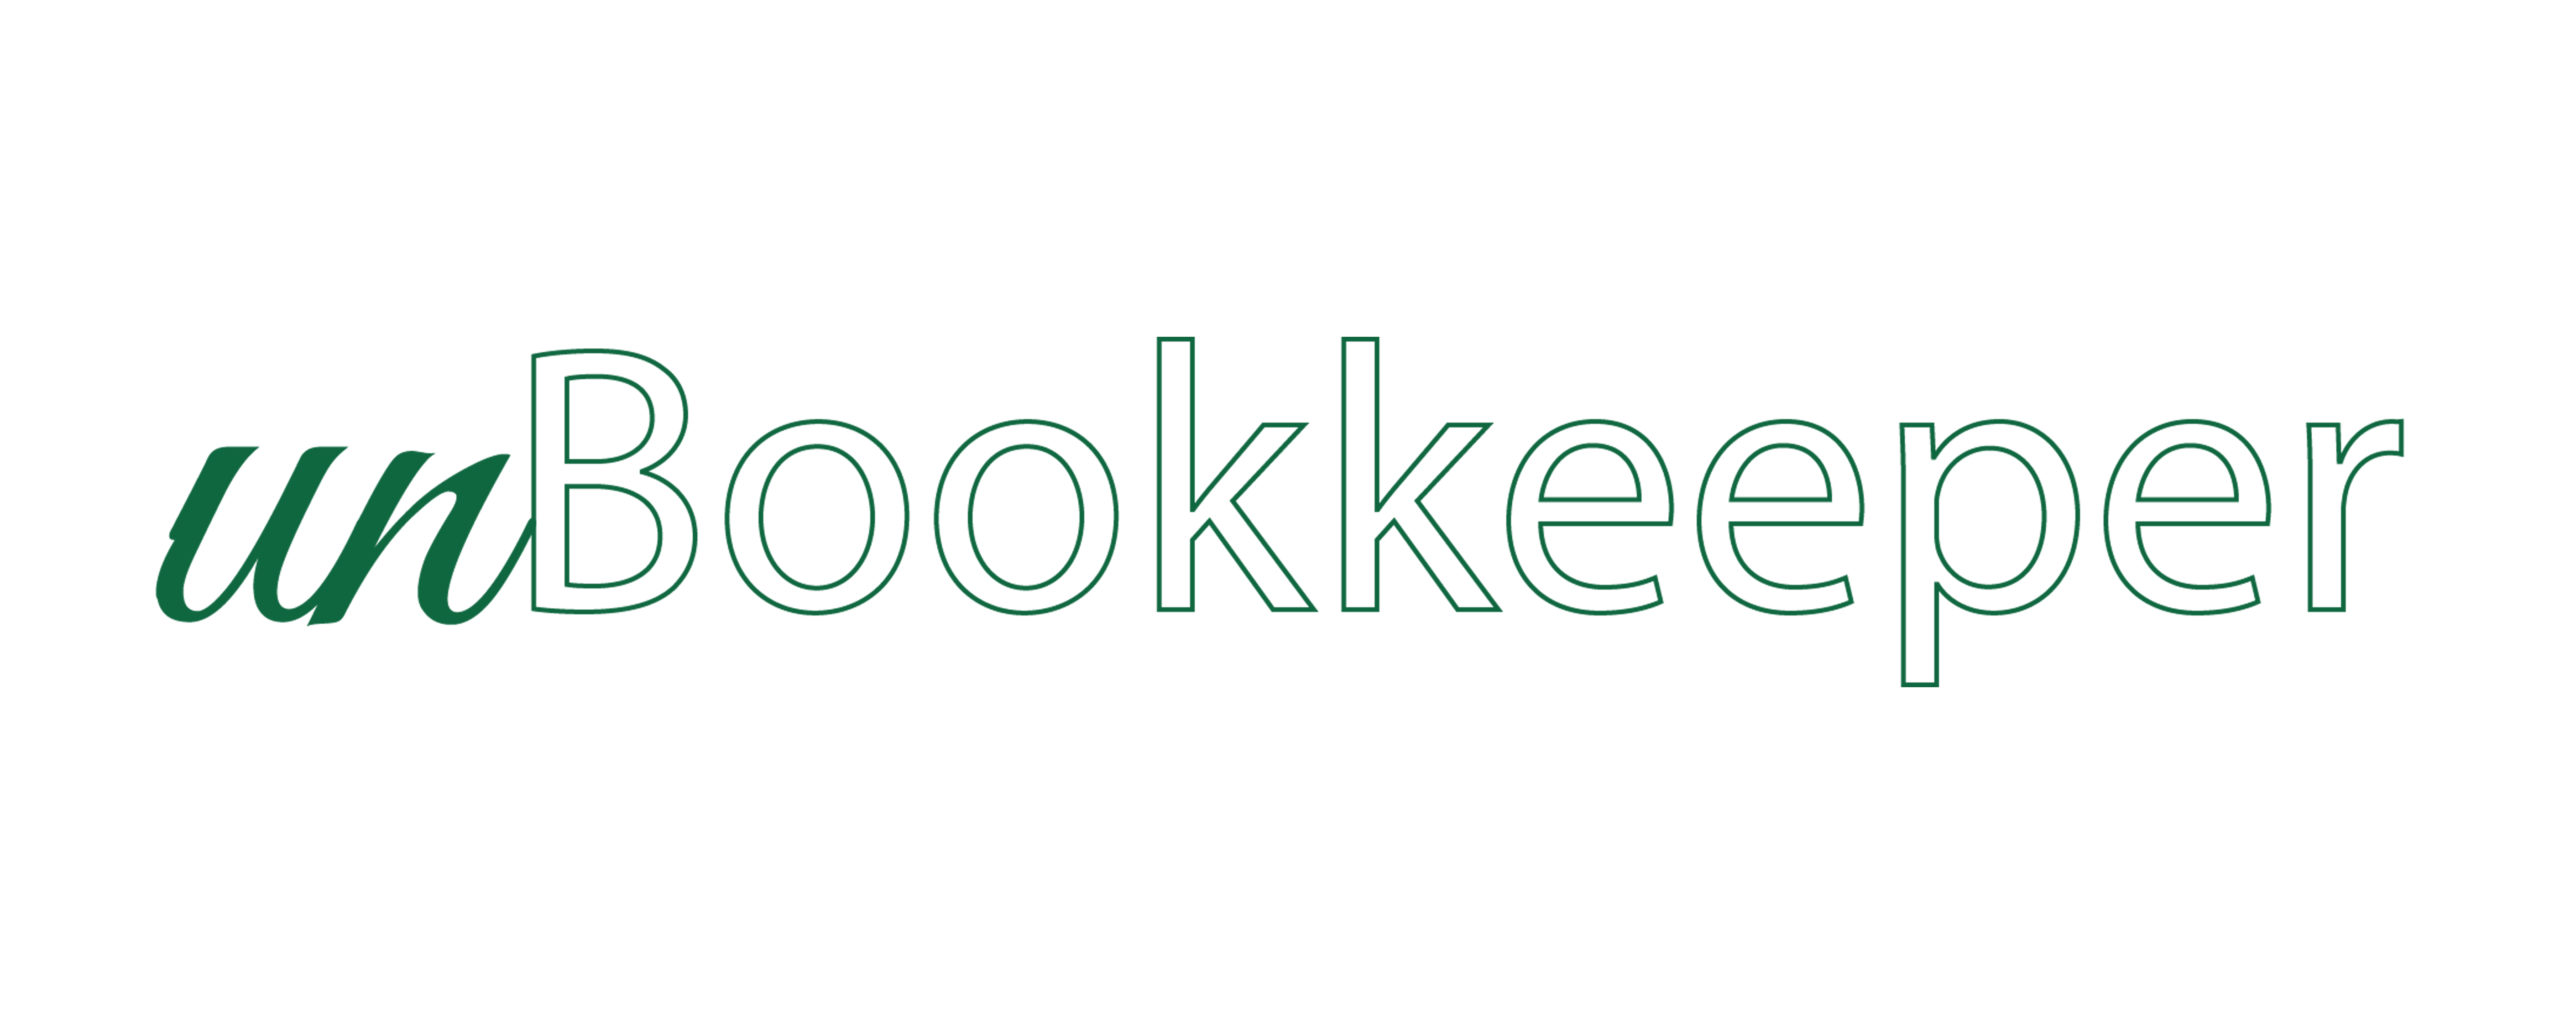 What is unBookkeeper?